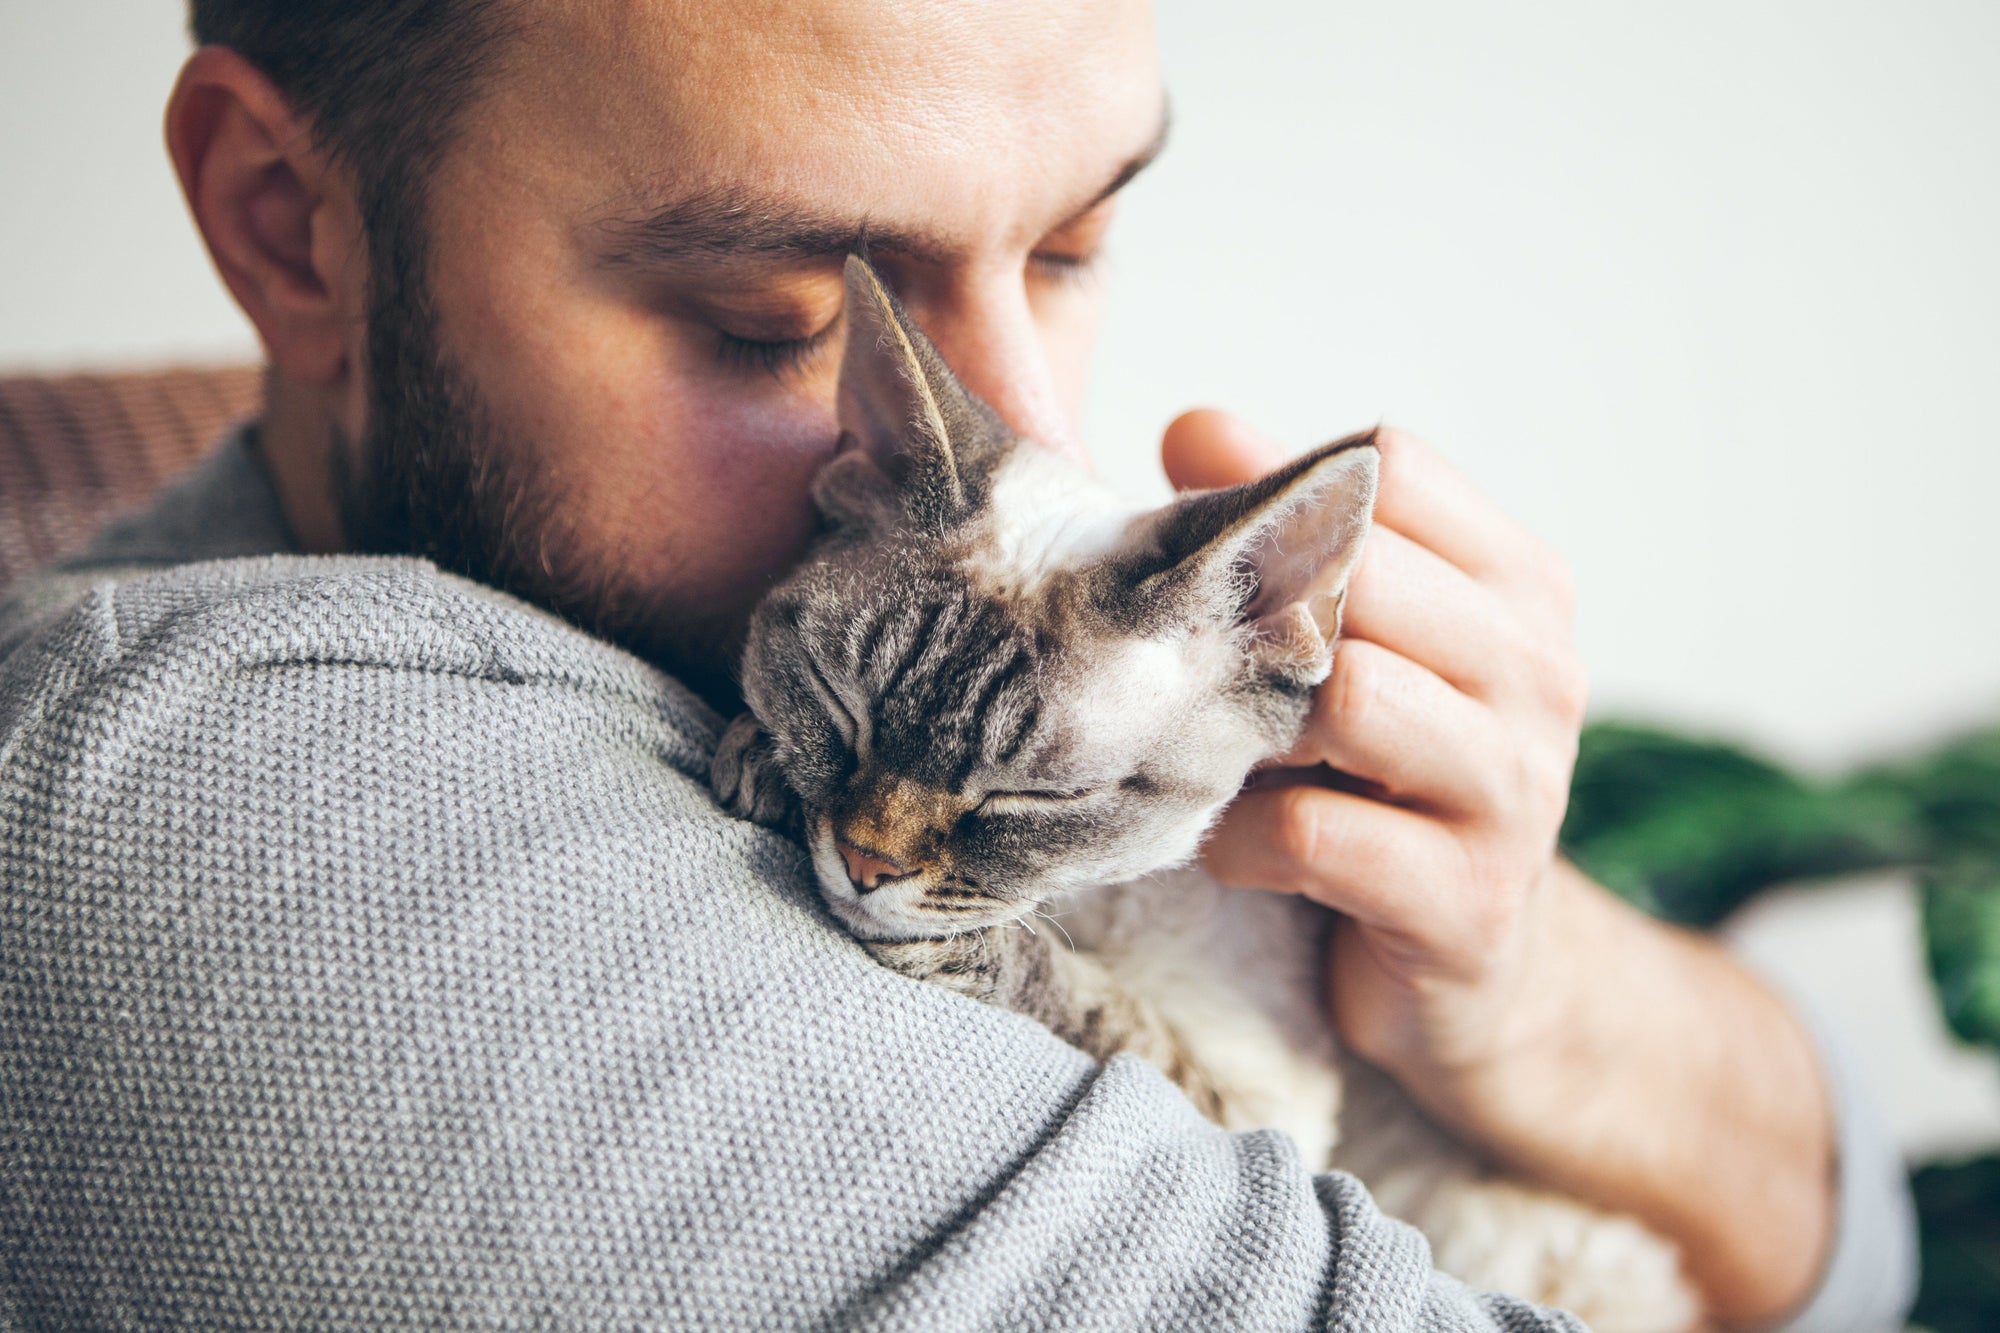 How to Celebrate National Cat Day With Your Furry Friend